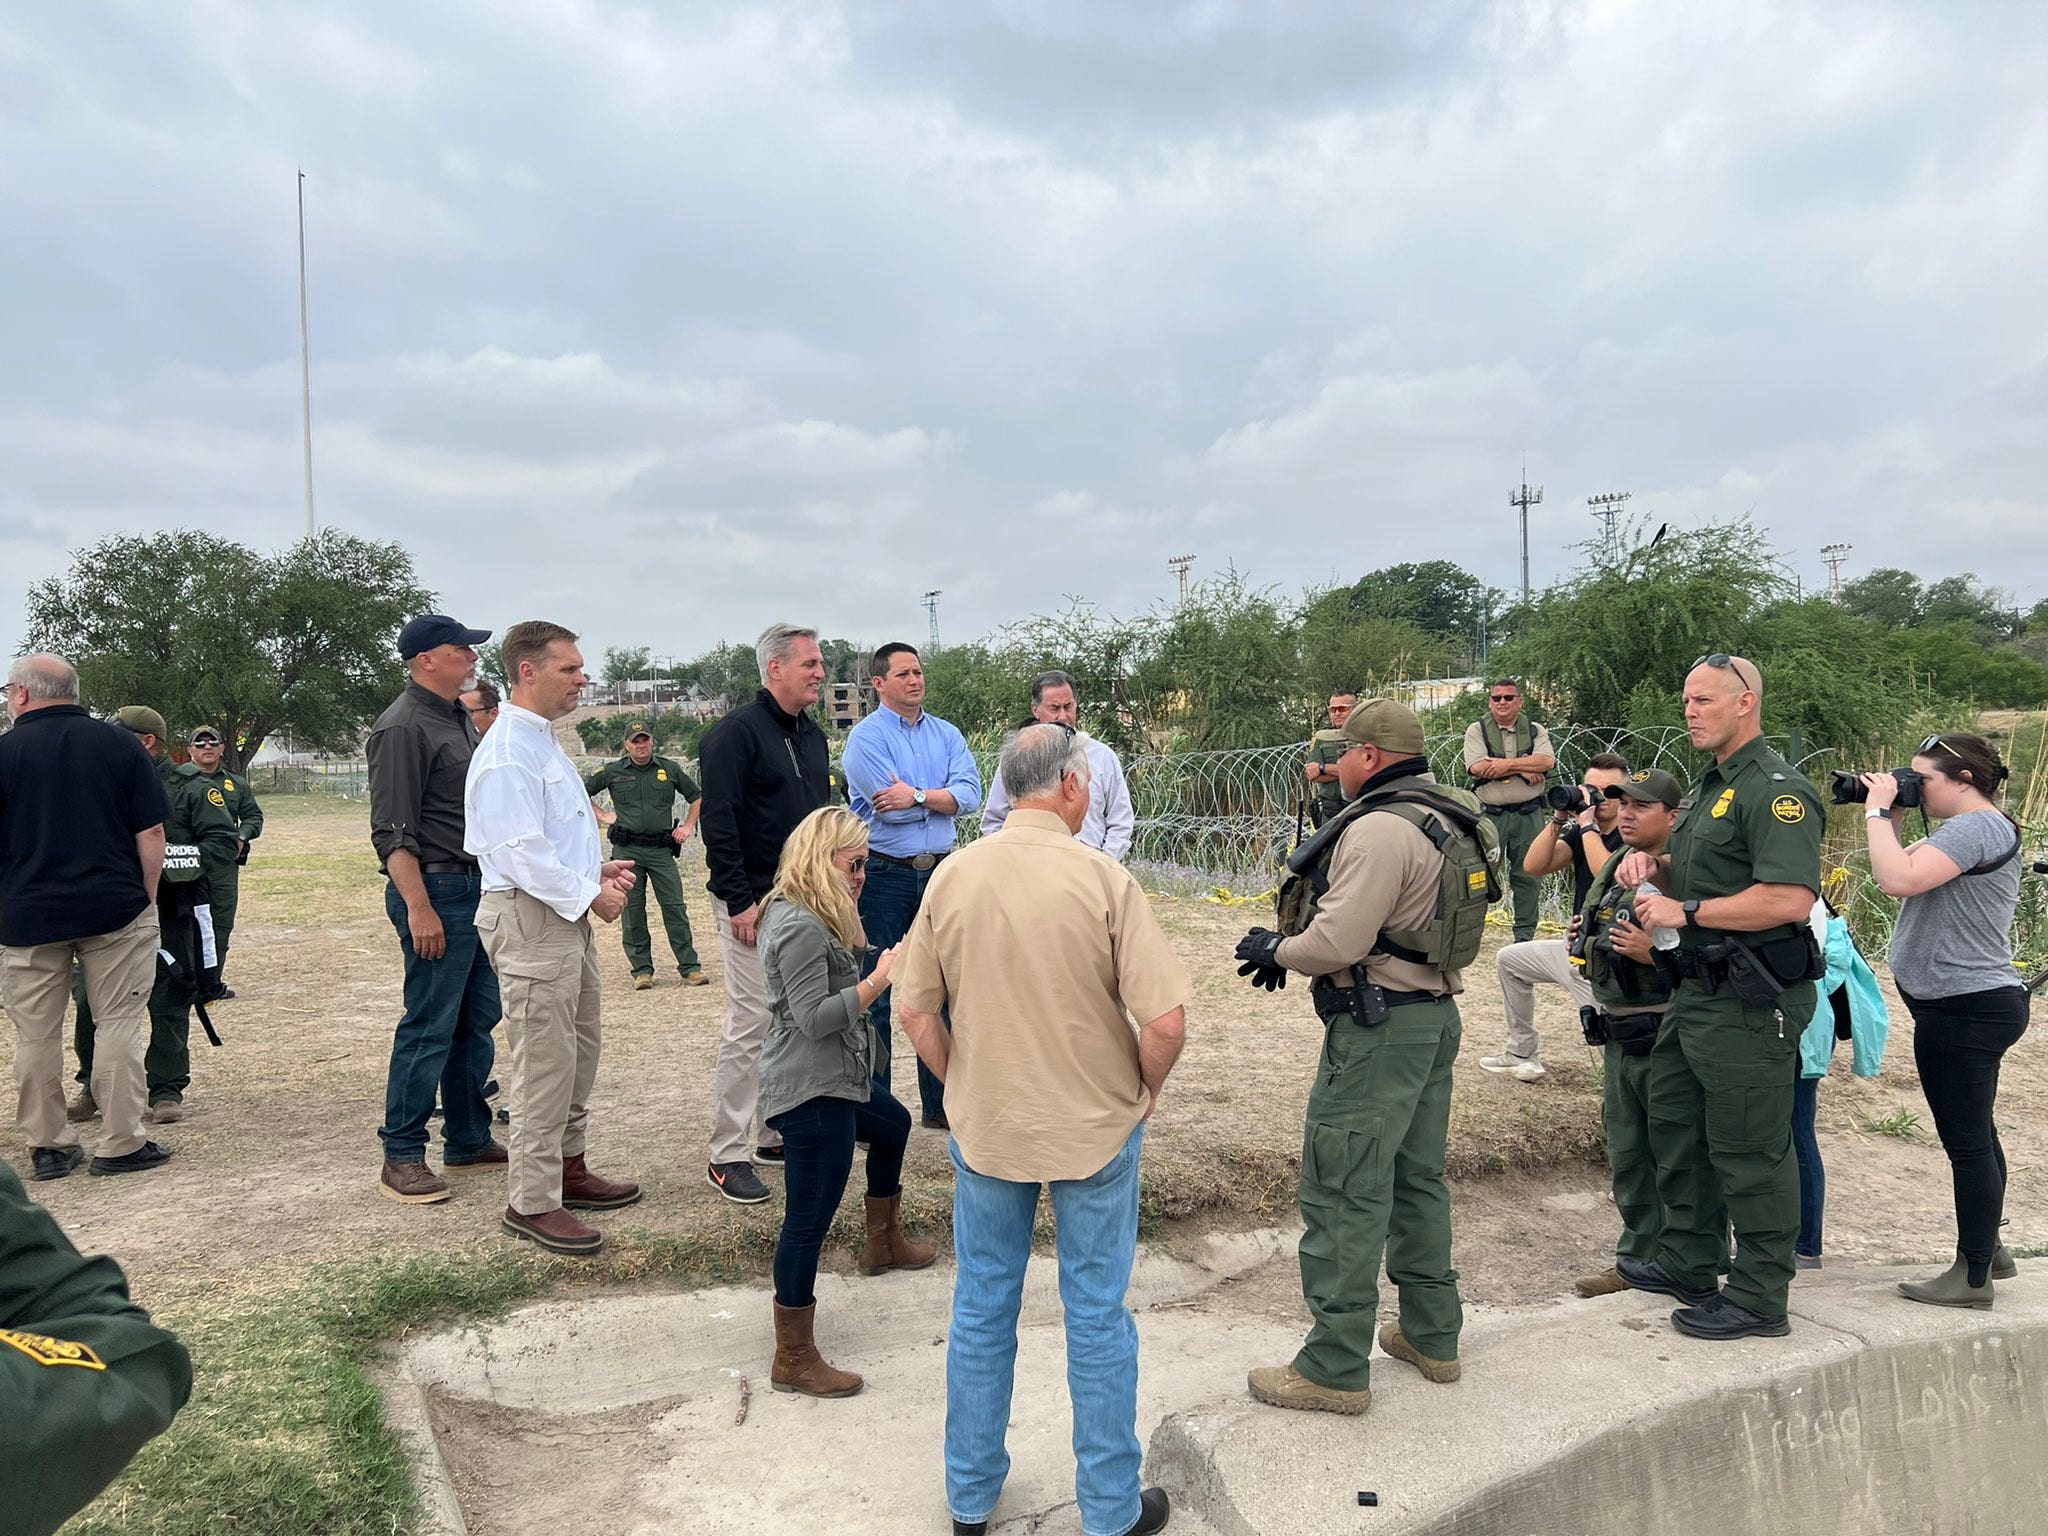 House Republicans visiting Texas border describe ‘anguish’ of agents dealing with mass crossings